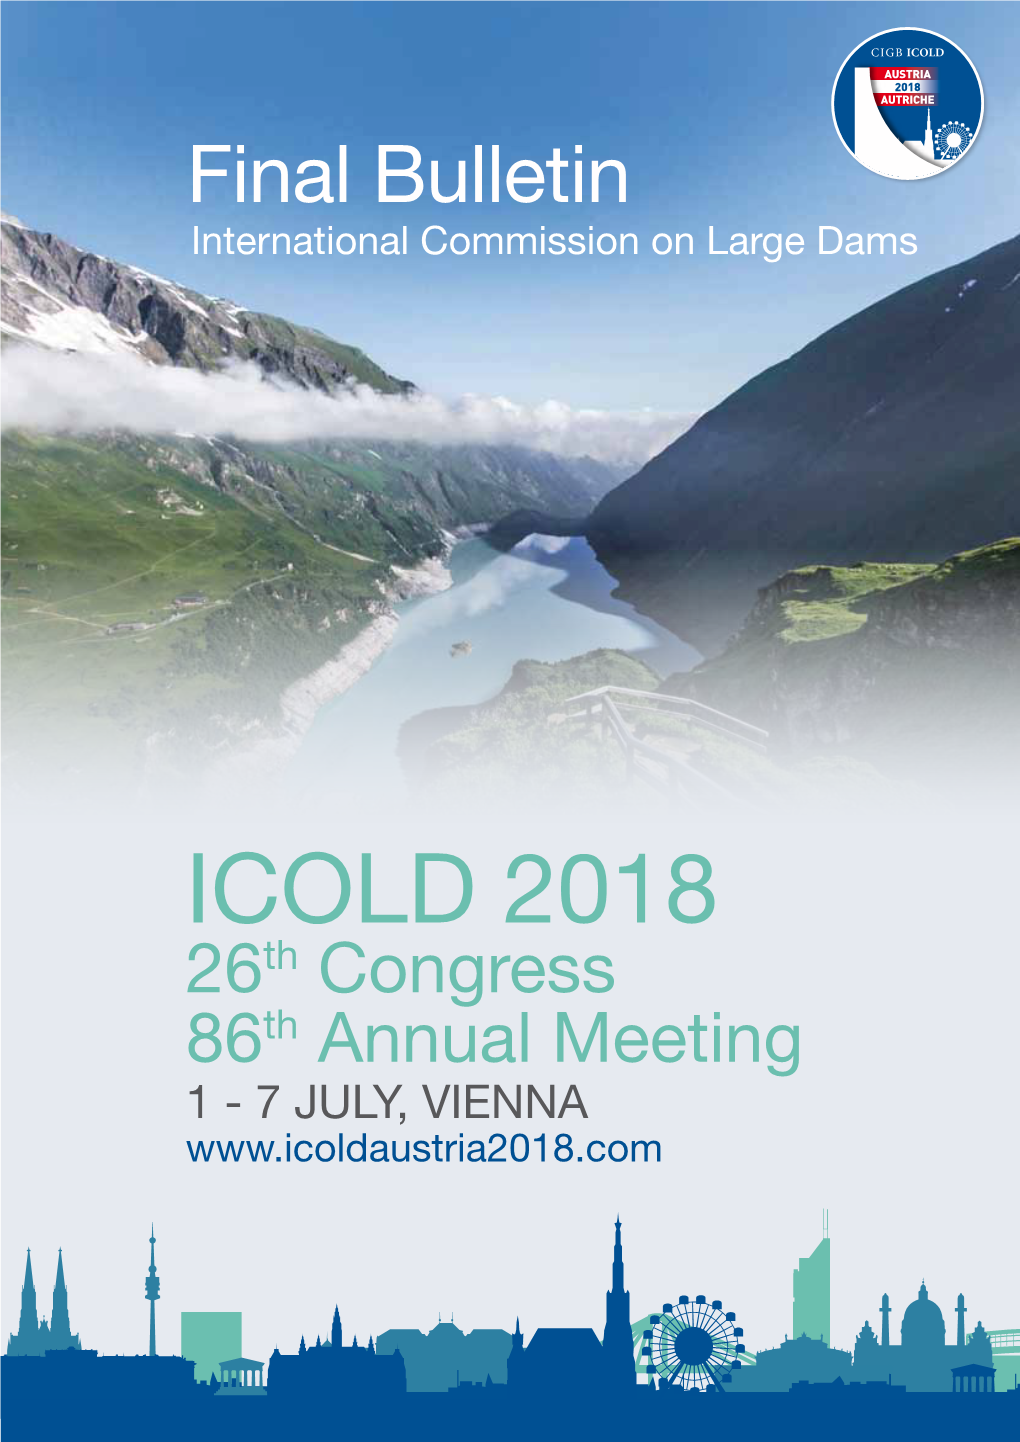 Icold 2018 – Coming to Austria